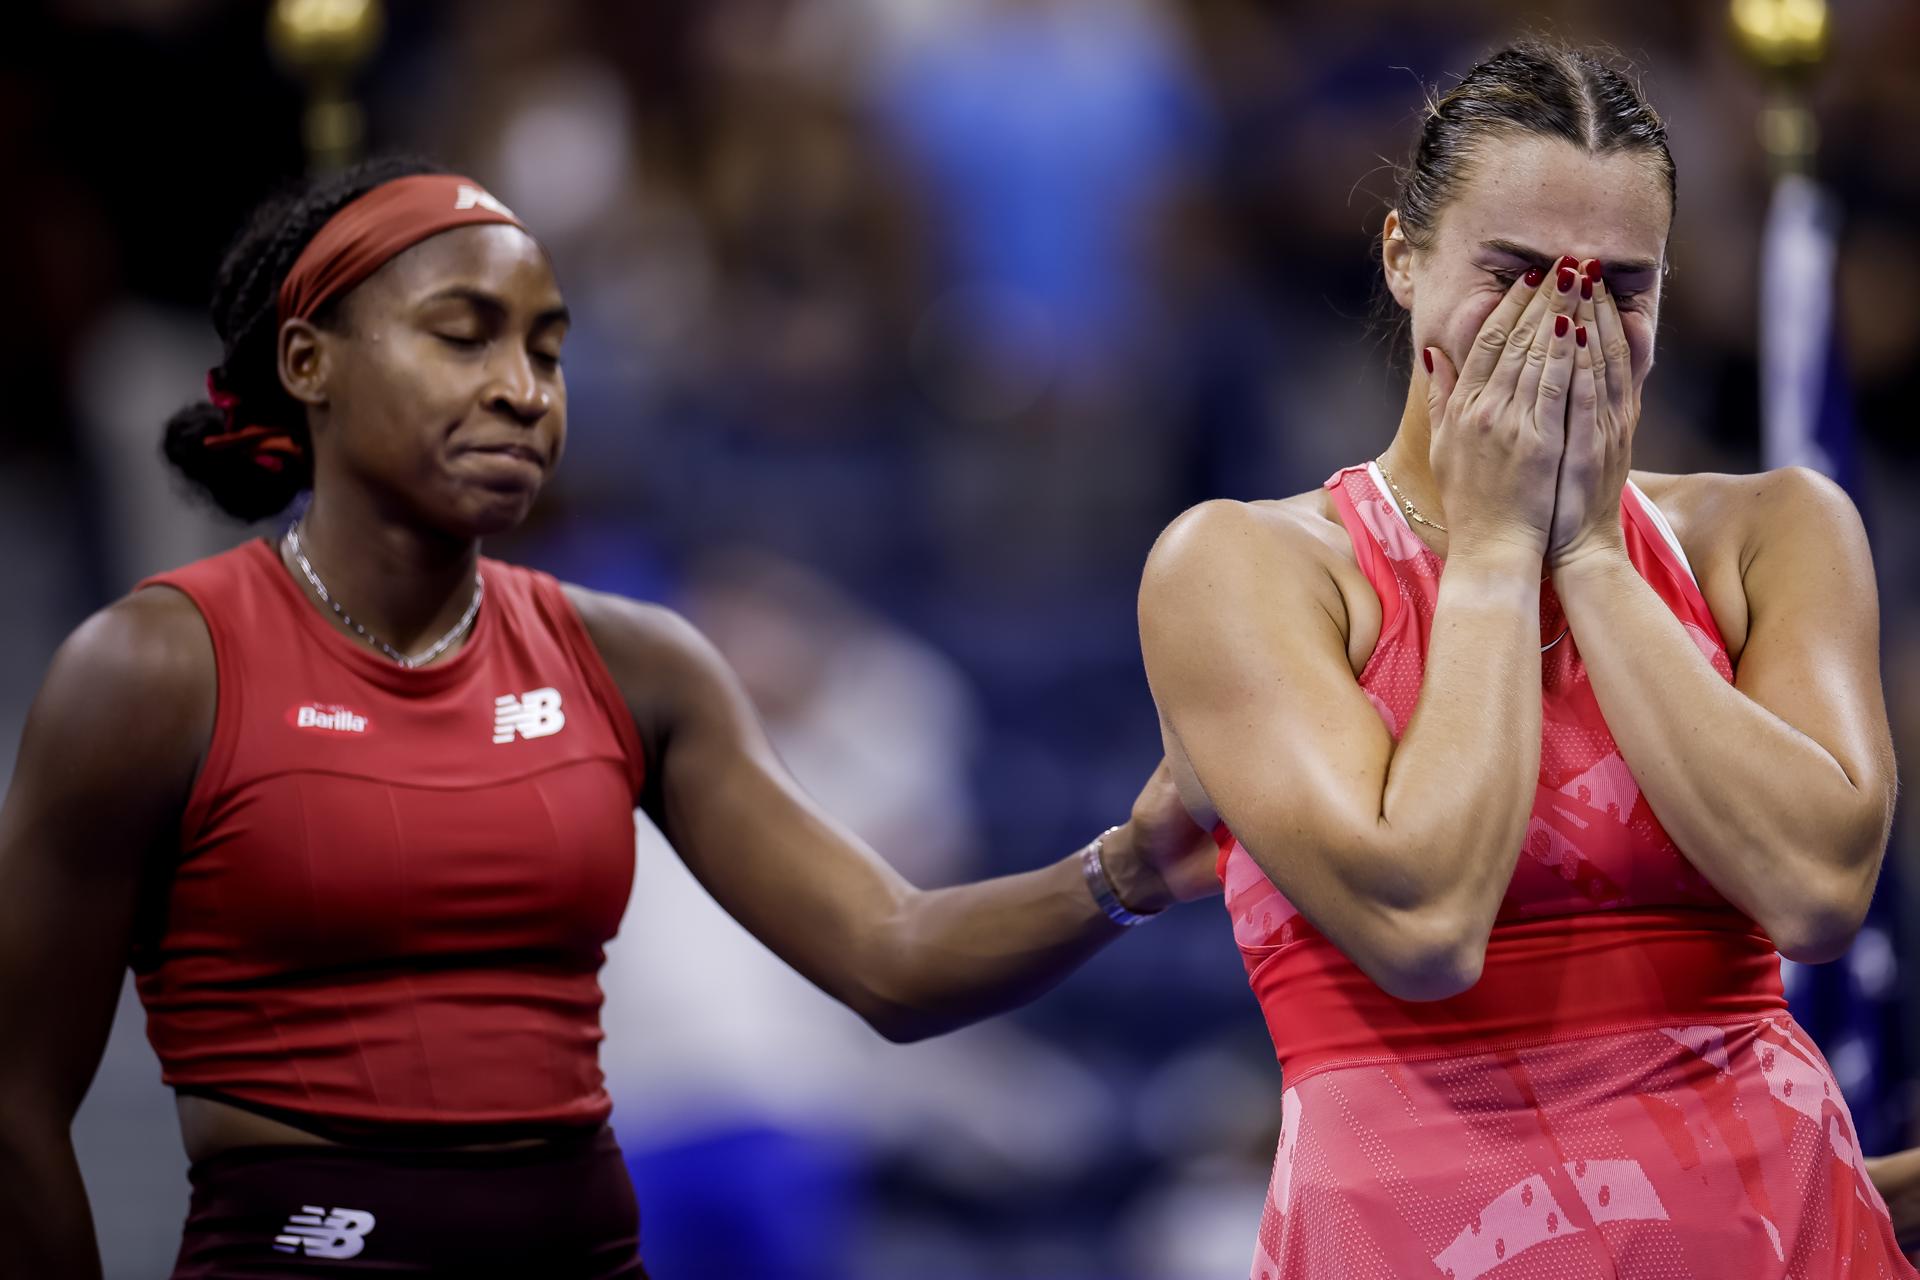 Coco Gauff (L) of the United States reacts with Aryna Sabalenka (R) of Belarus after Gauff defeated Sabalenka to win the women's singles final match during the US Open Tennis Championships at the USTA National Tennis Center in Flushing Meadows, New York, 09 September 2023. EFE-EPA/CJ GUNTHER
